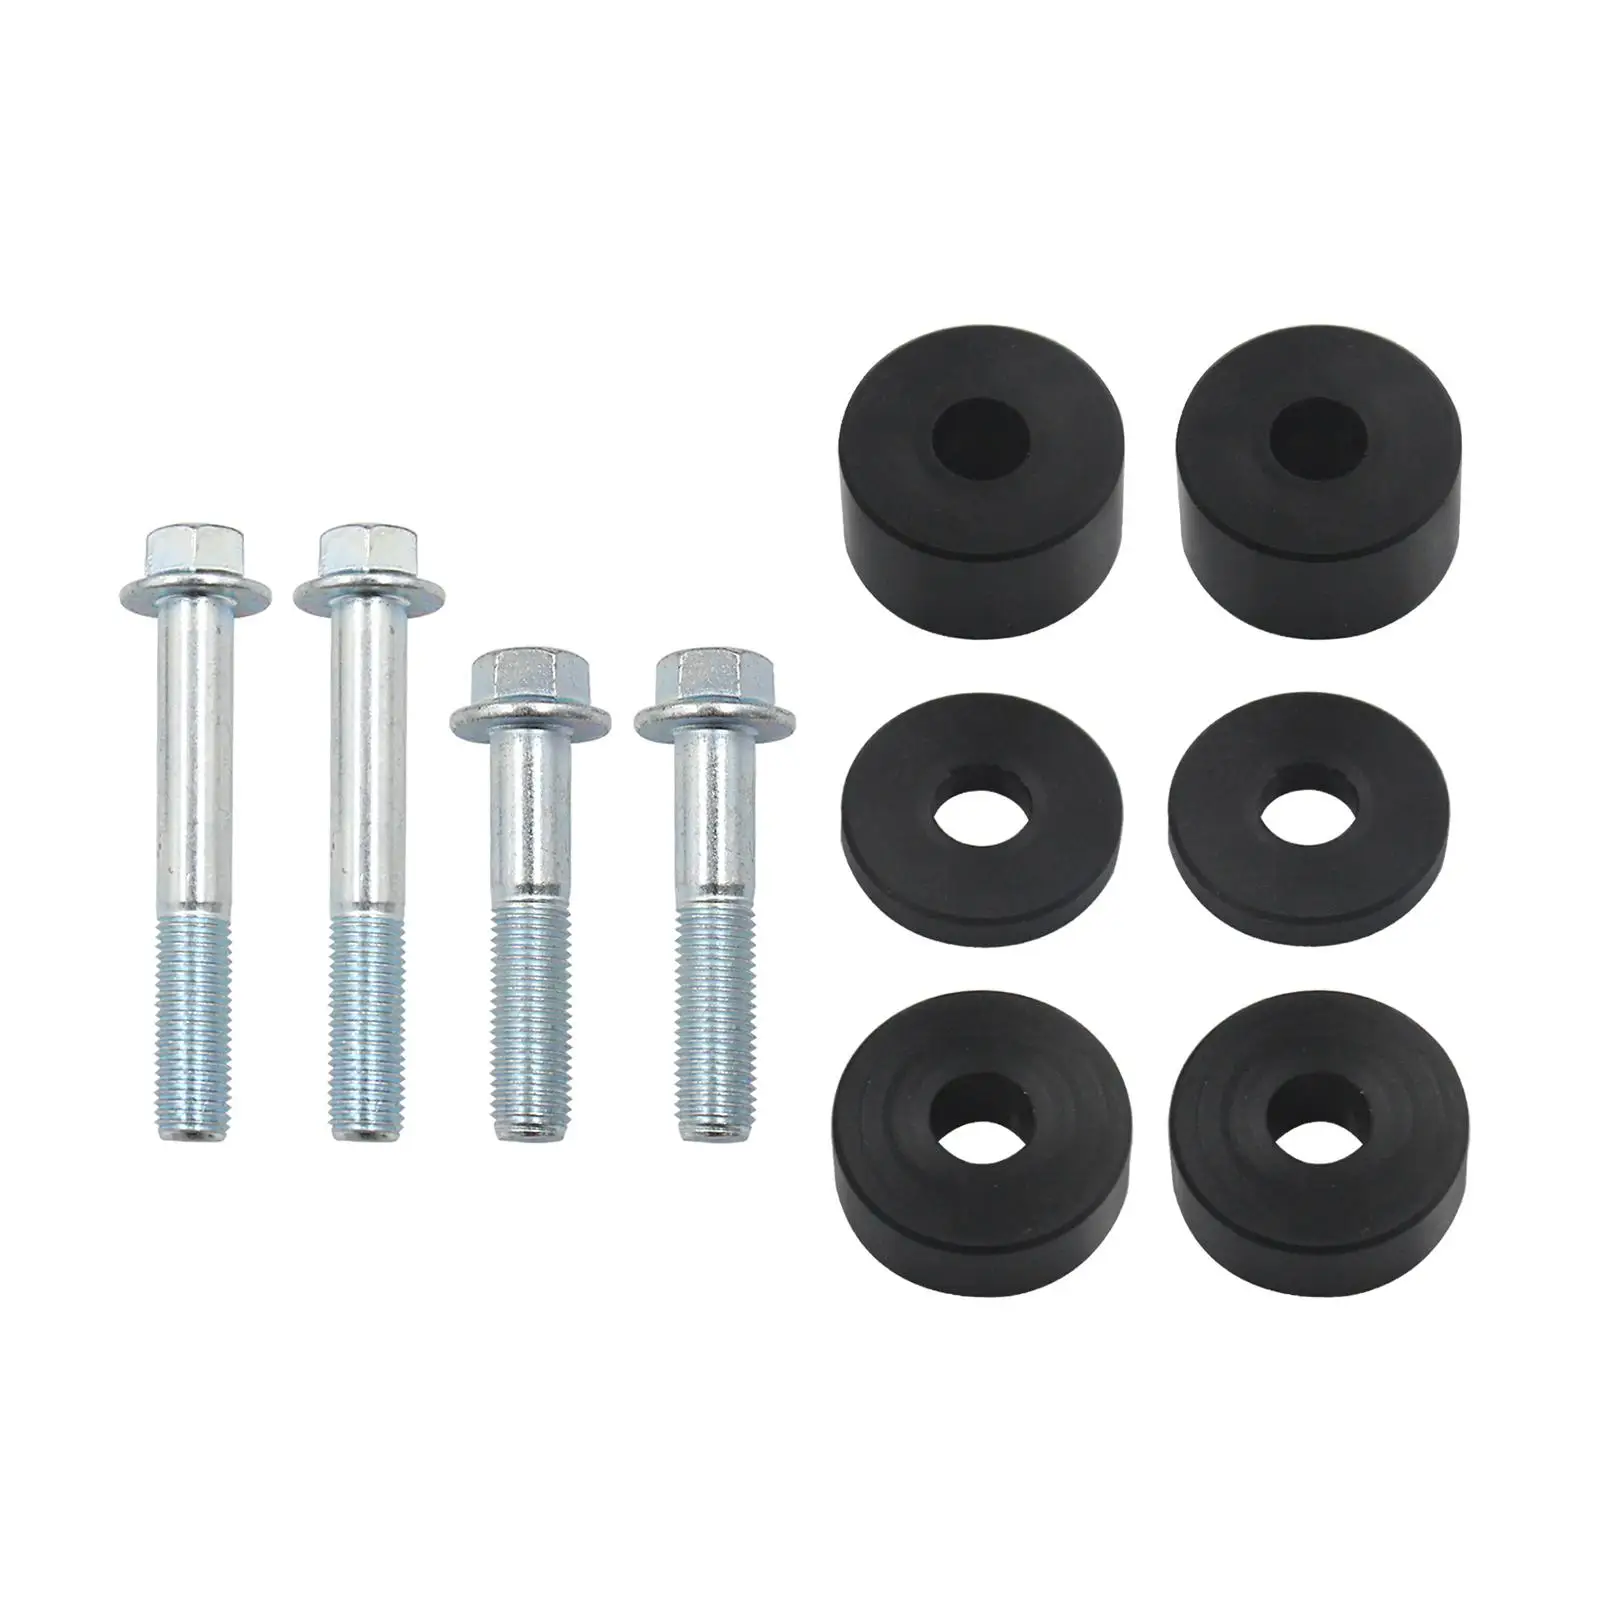 Seat Spacer Durable Auto Accessories High Performance Spare Parts Easy to Install Replacement Parts Seat Spacer Jacker Fitments